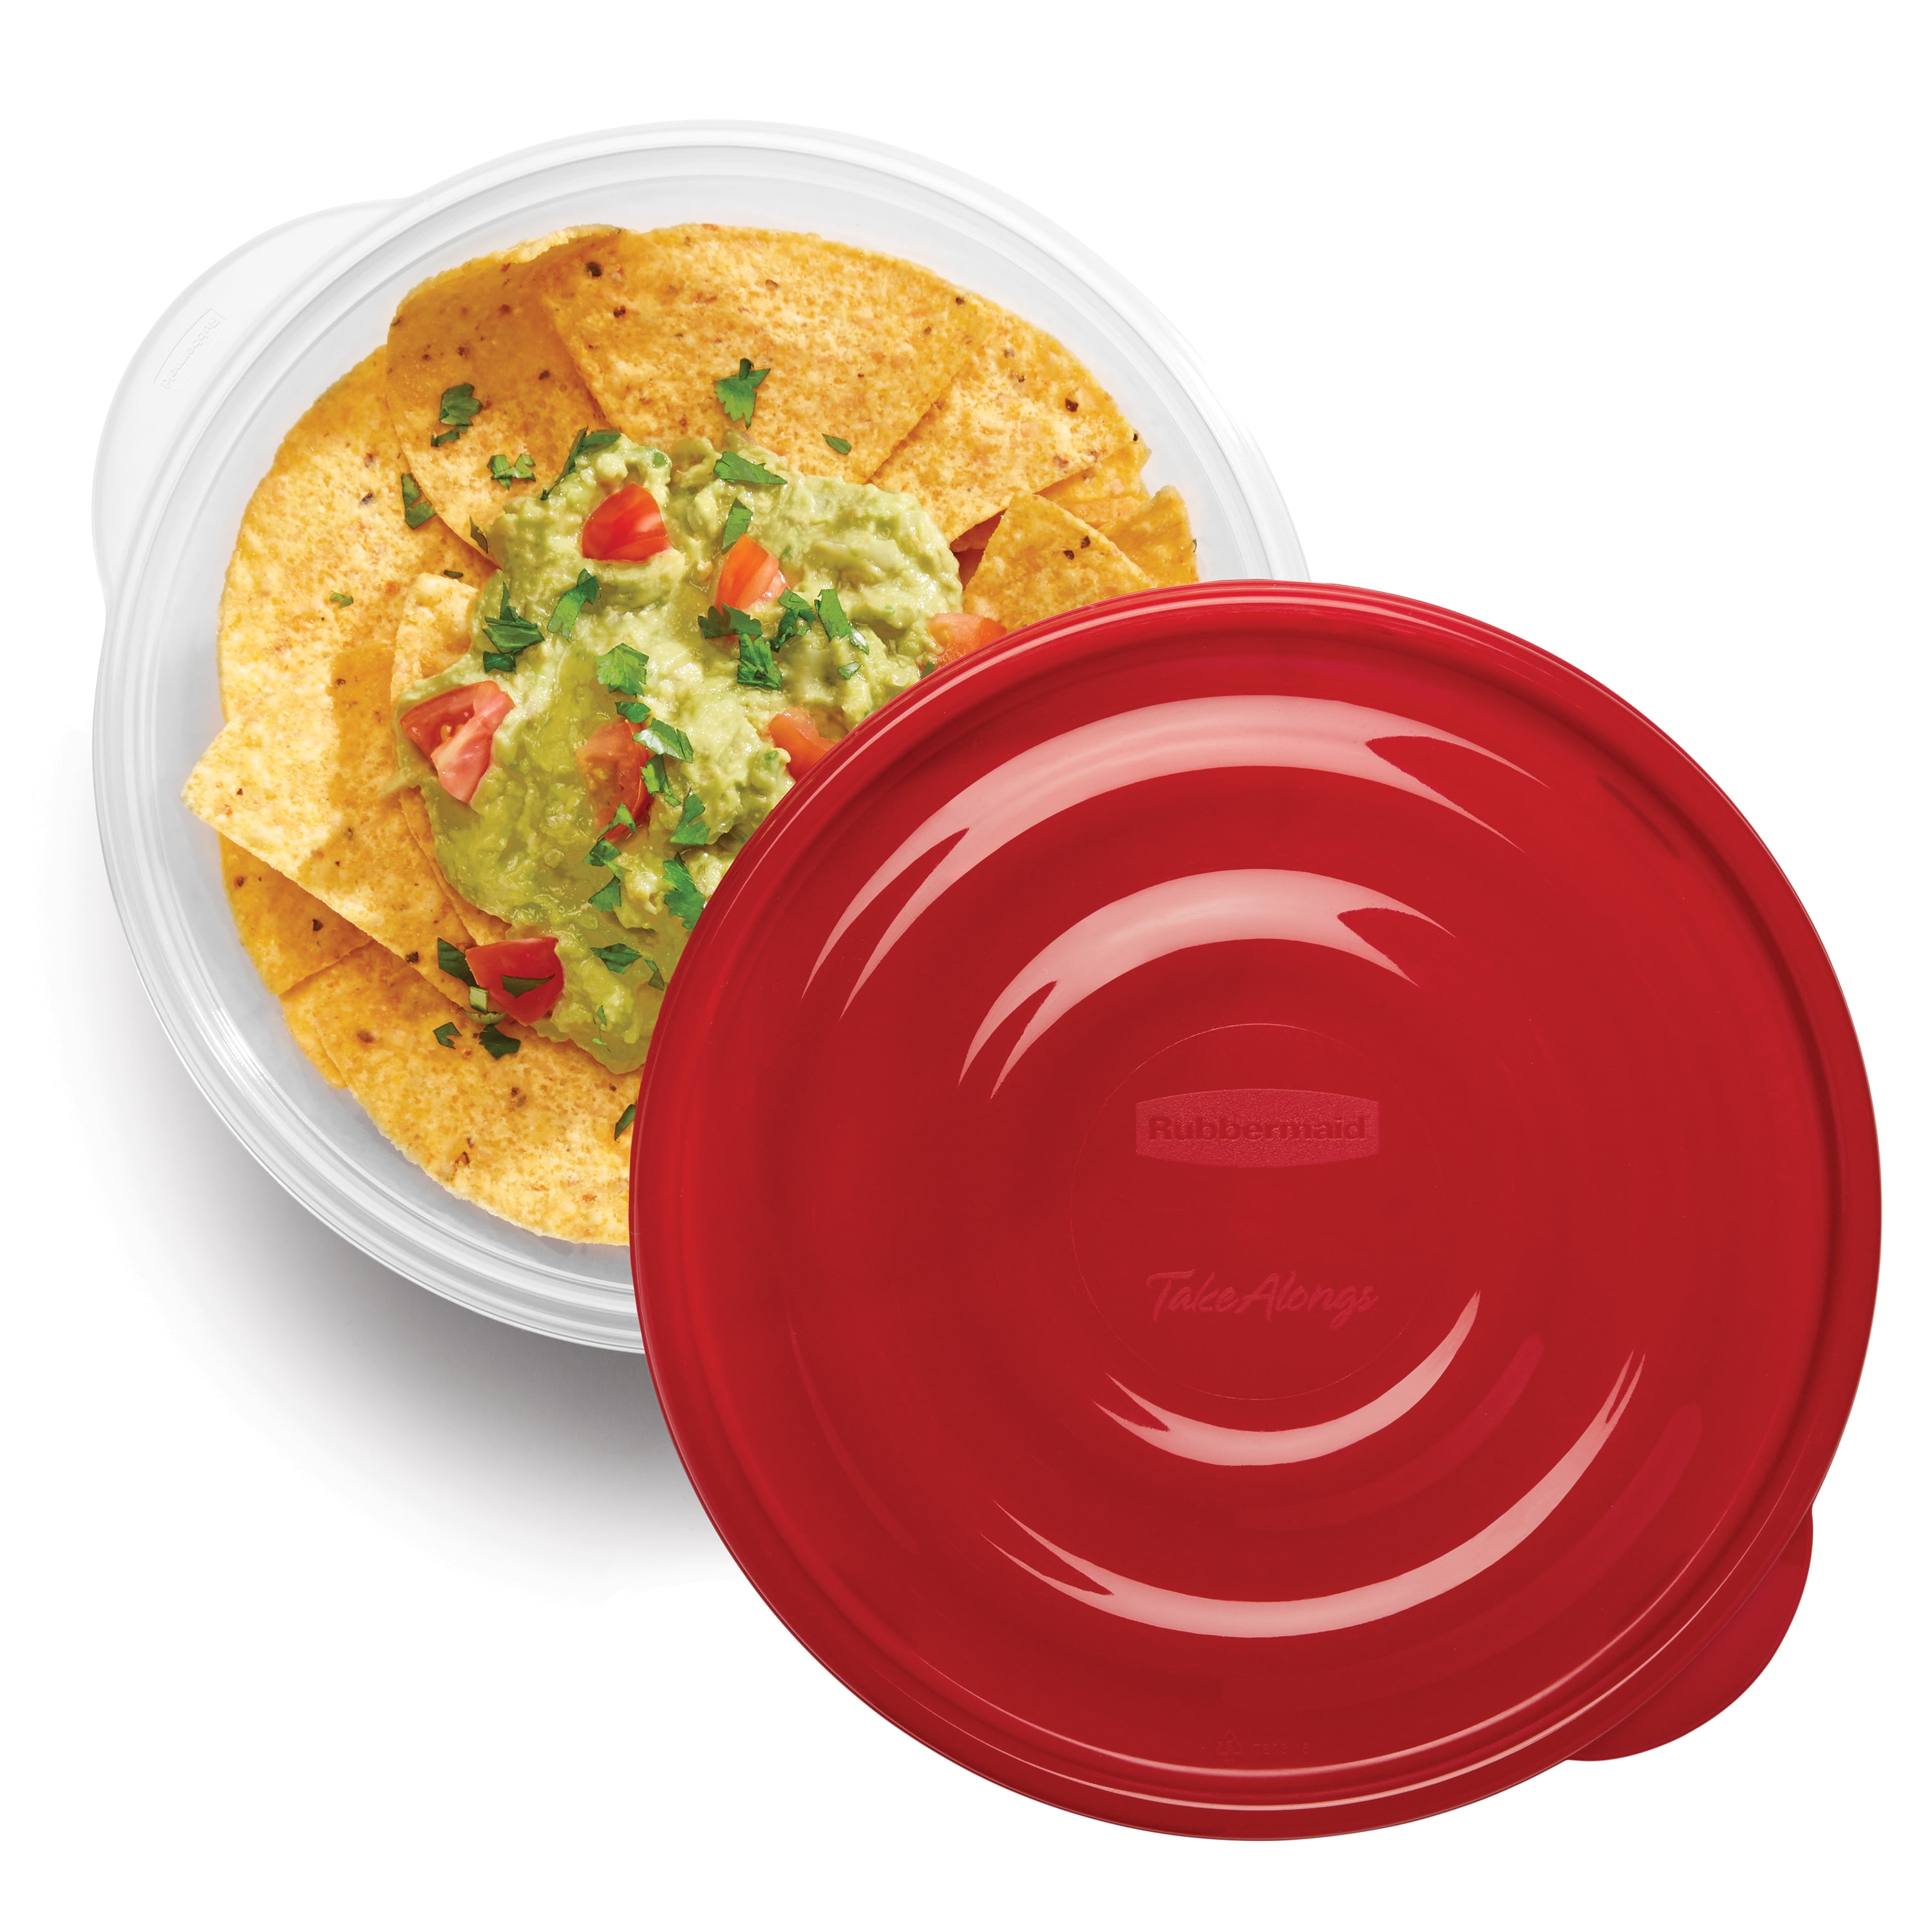 Rubbermaid MixerMate Bottle - Chili Red, 6 - Kroger